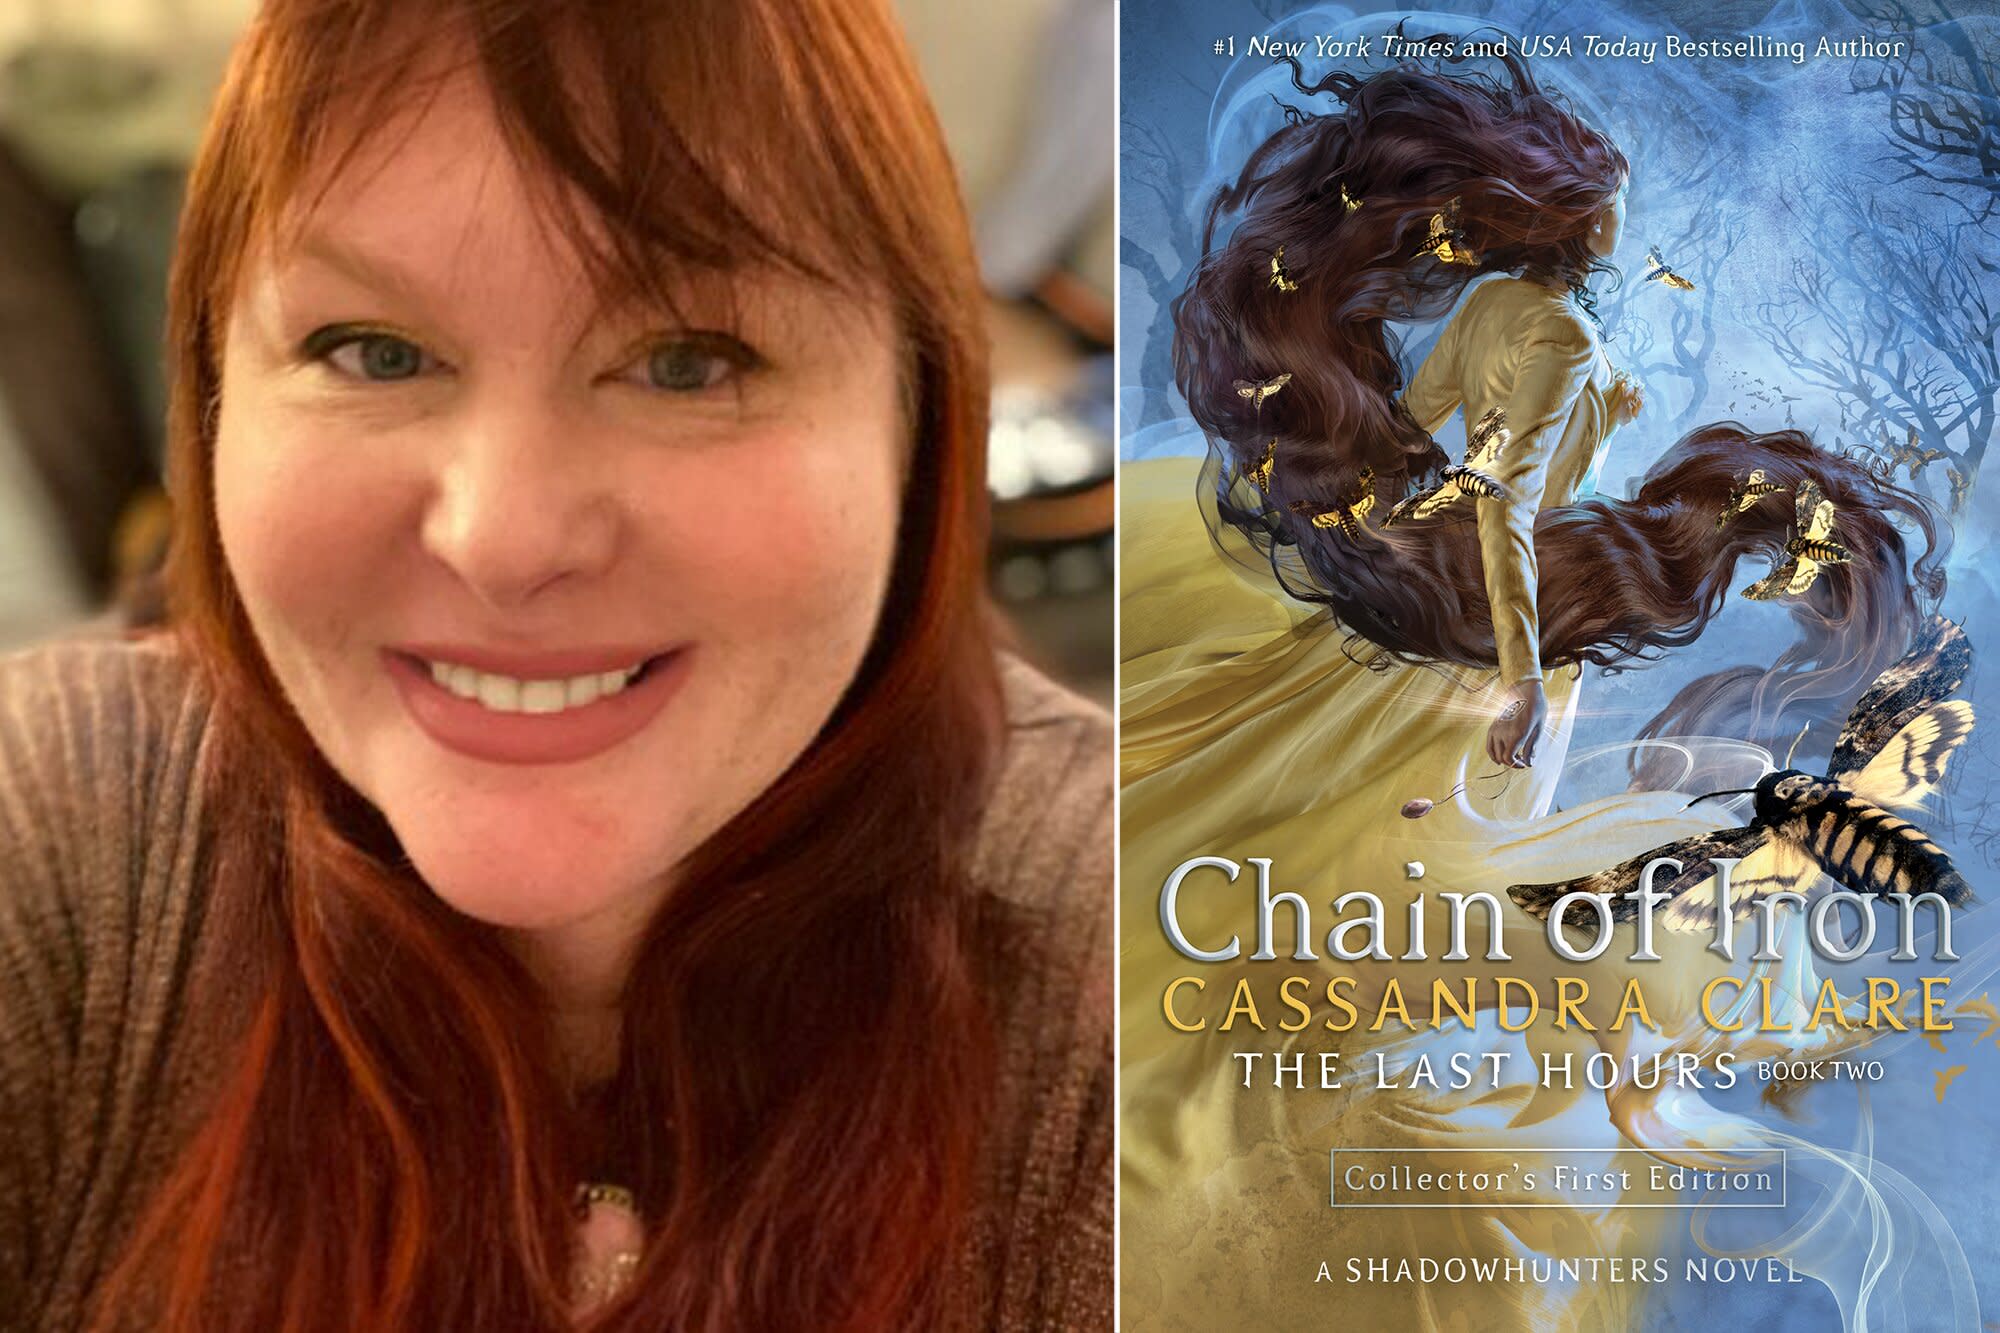 Get the exclusive details on Cassandra Clare's virtual Chain of Iron